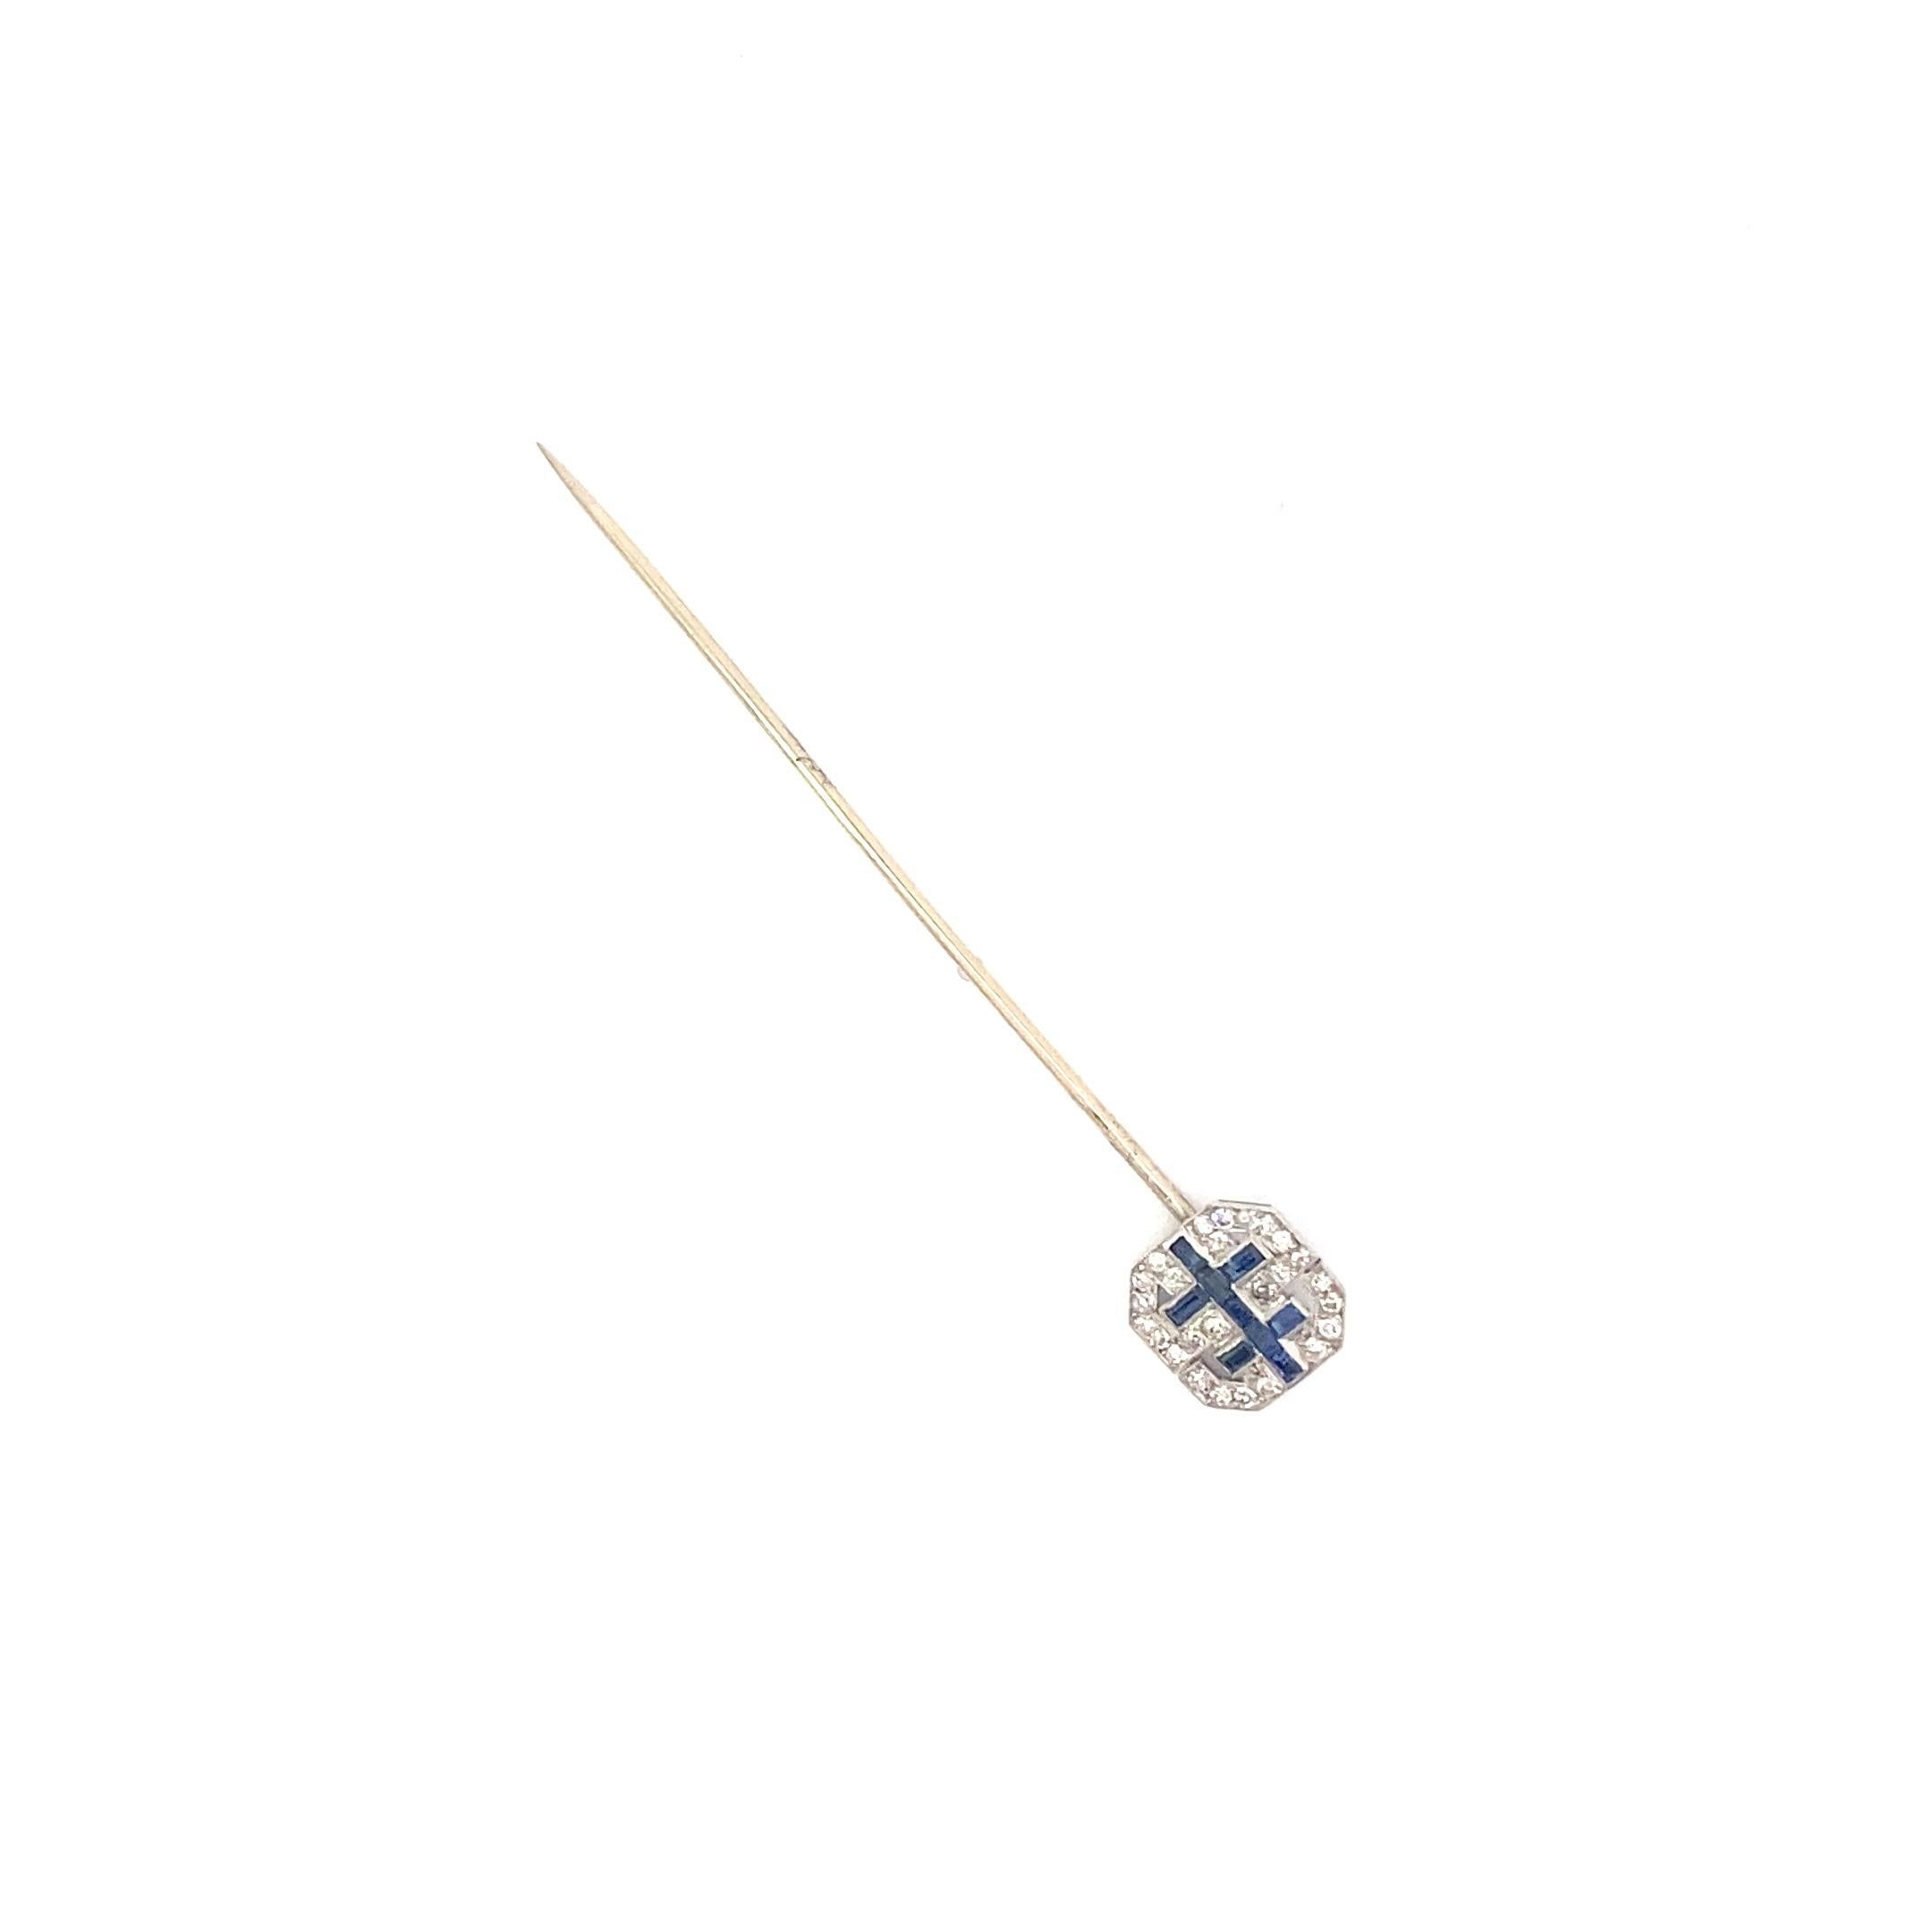 Antique french 18k Diamond & Sapphire Stick Pin (Patterned Sapphires) In Good Condition For Sale In Brooklyn, NY